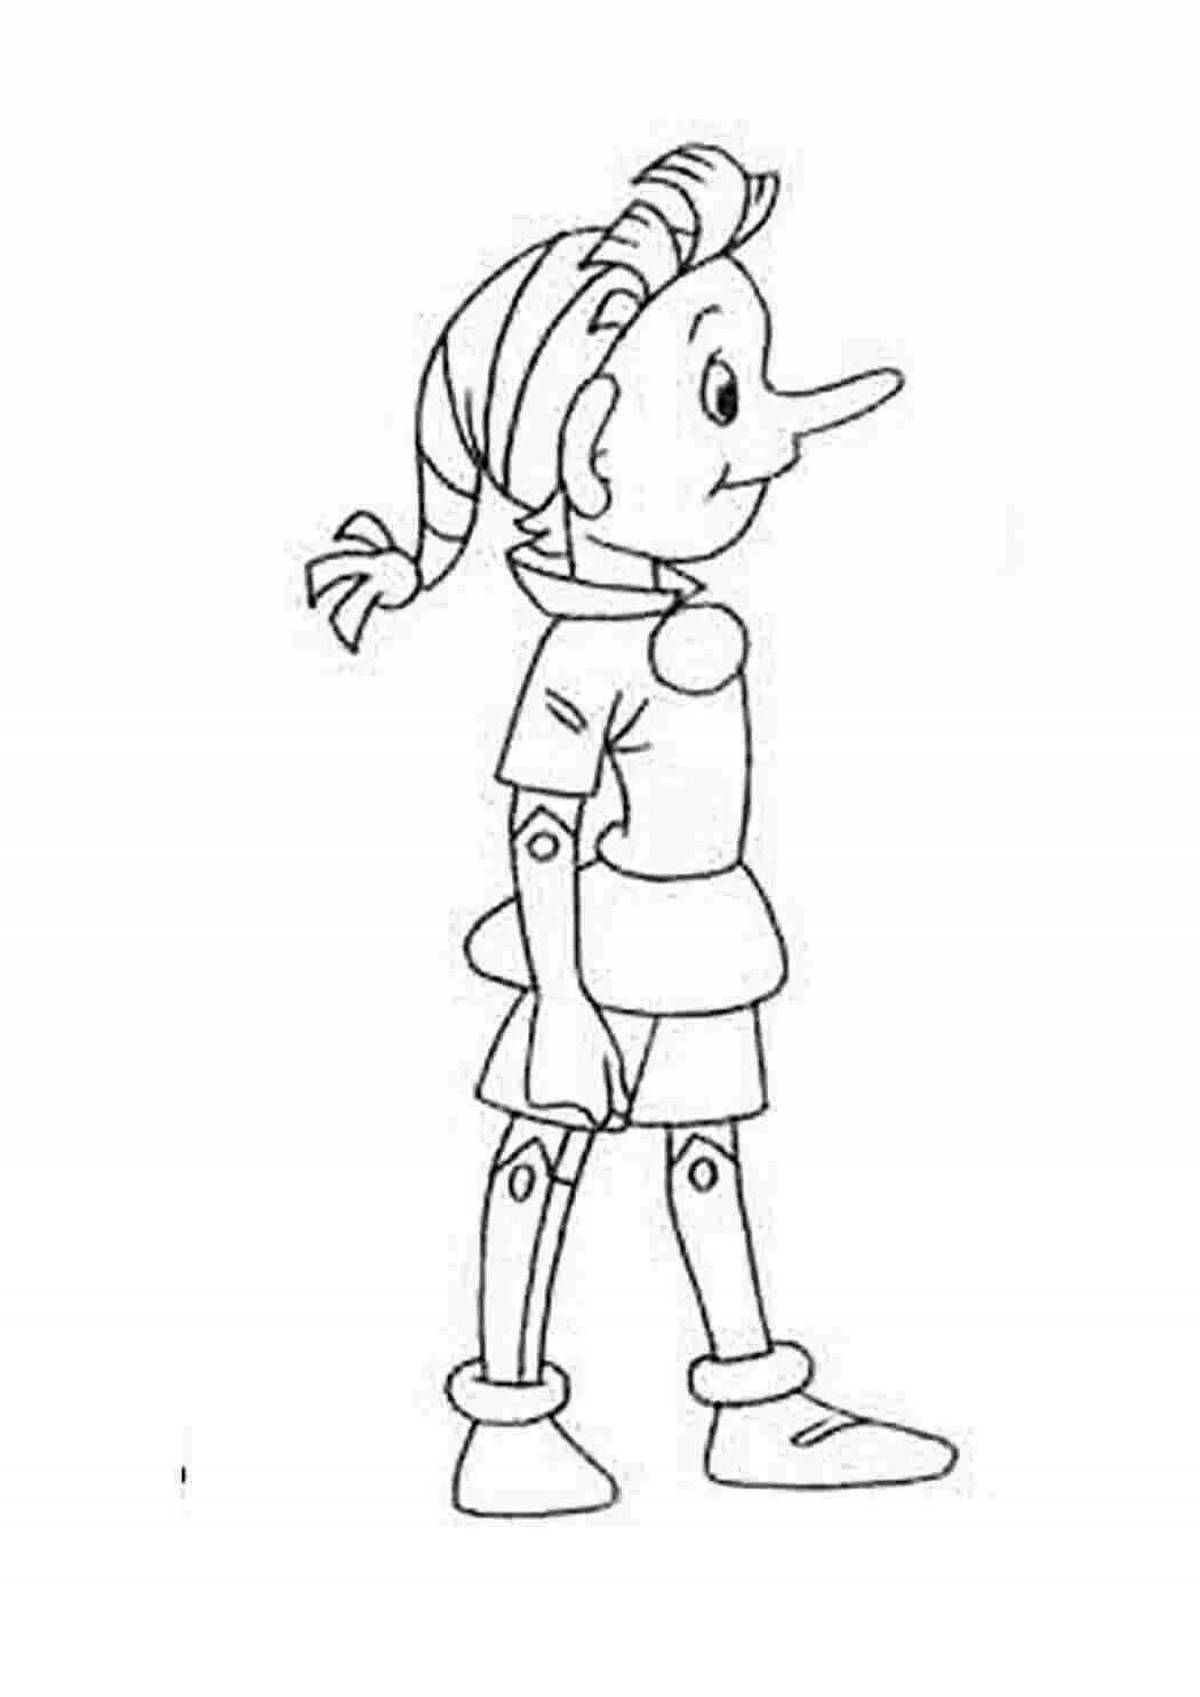 Fancy drawing of Pinocchio